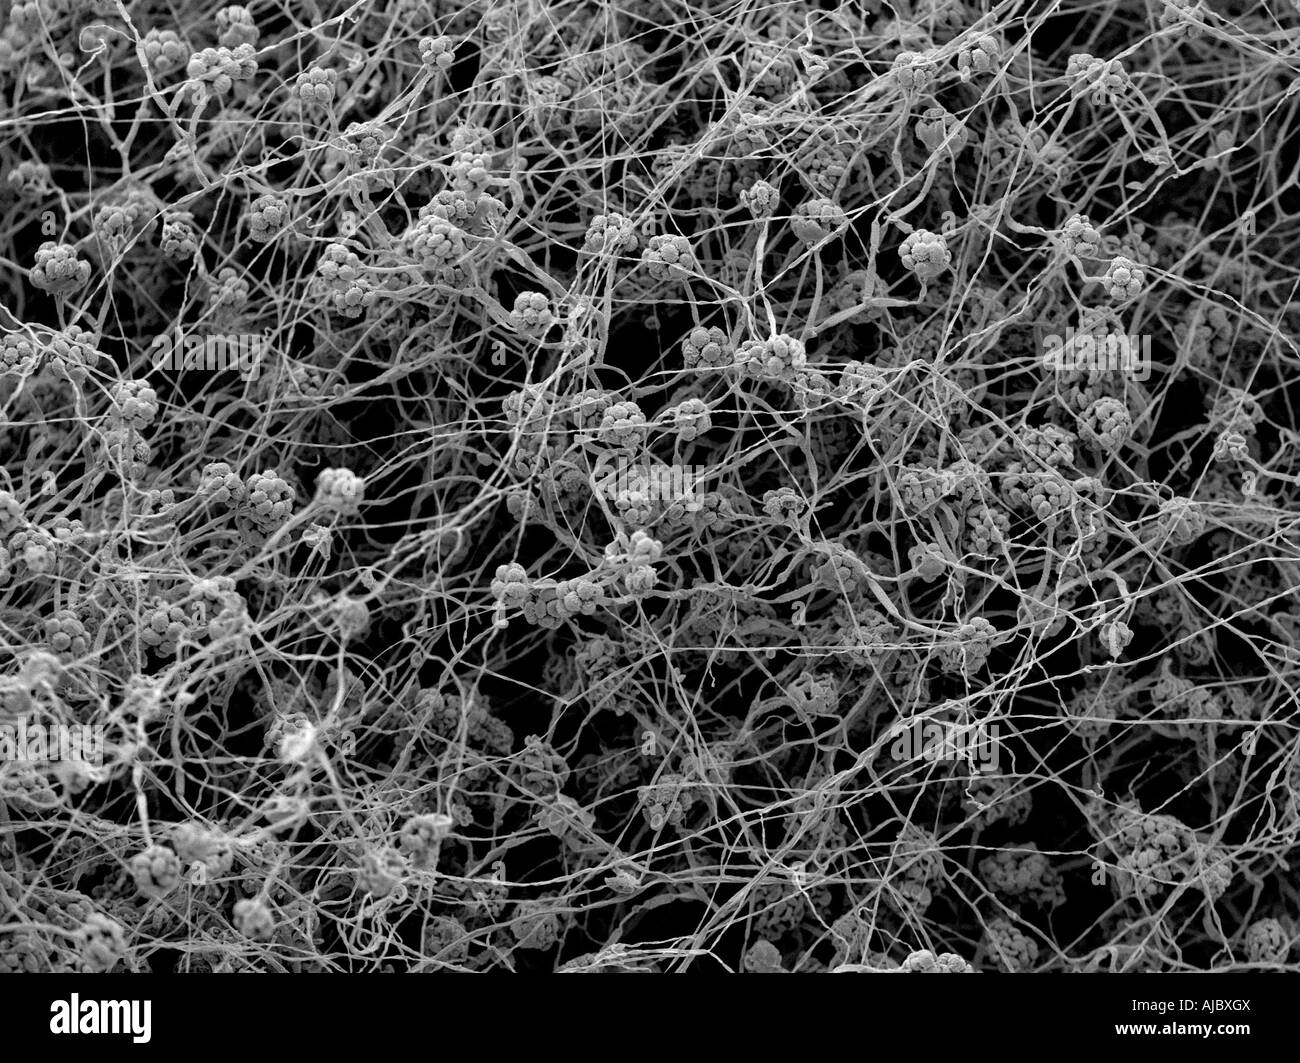 A scanning electron micrograph (SEM) of Stachybotrys chartarum Stock Photo